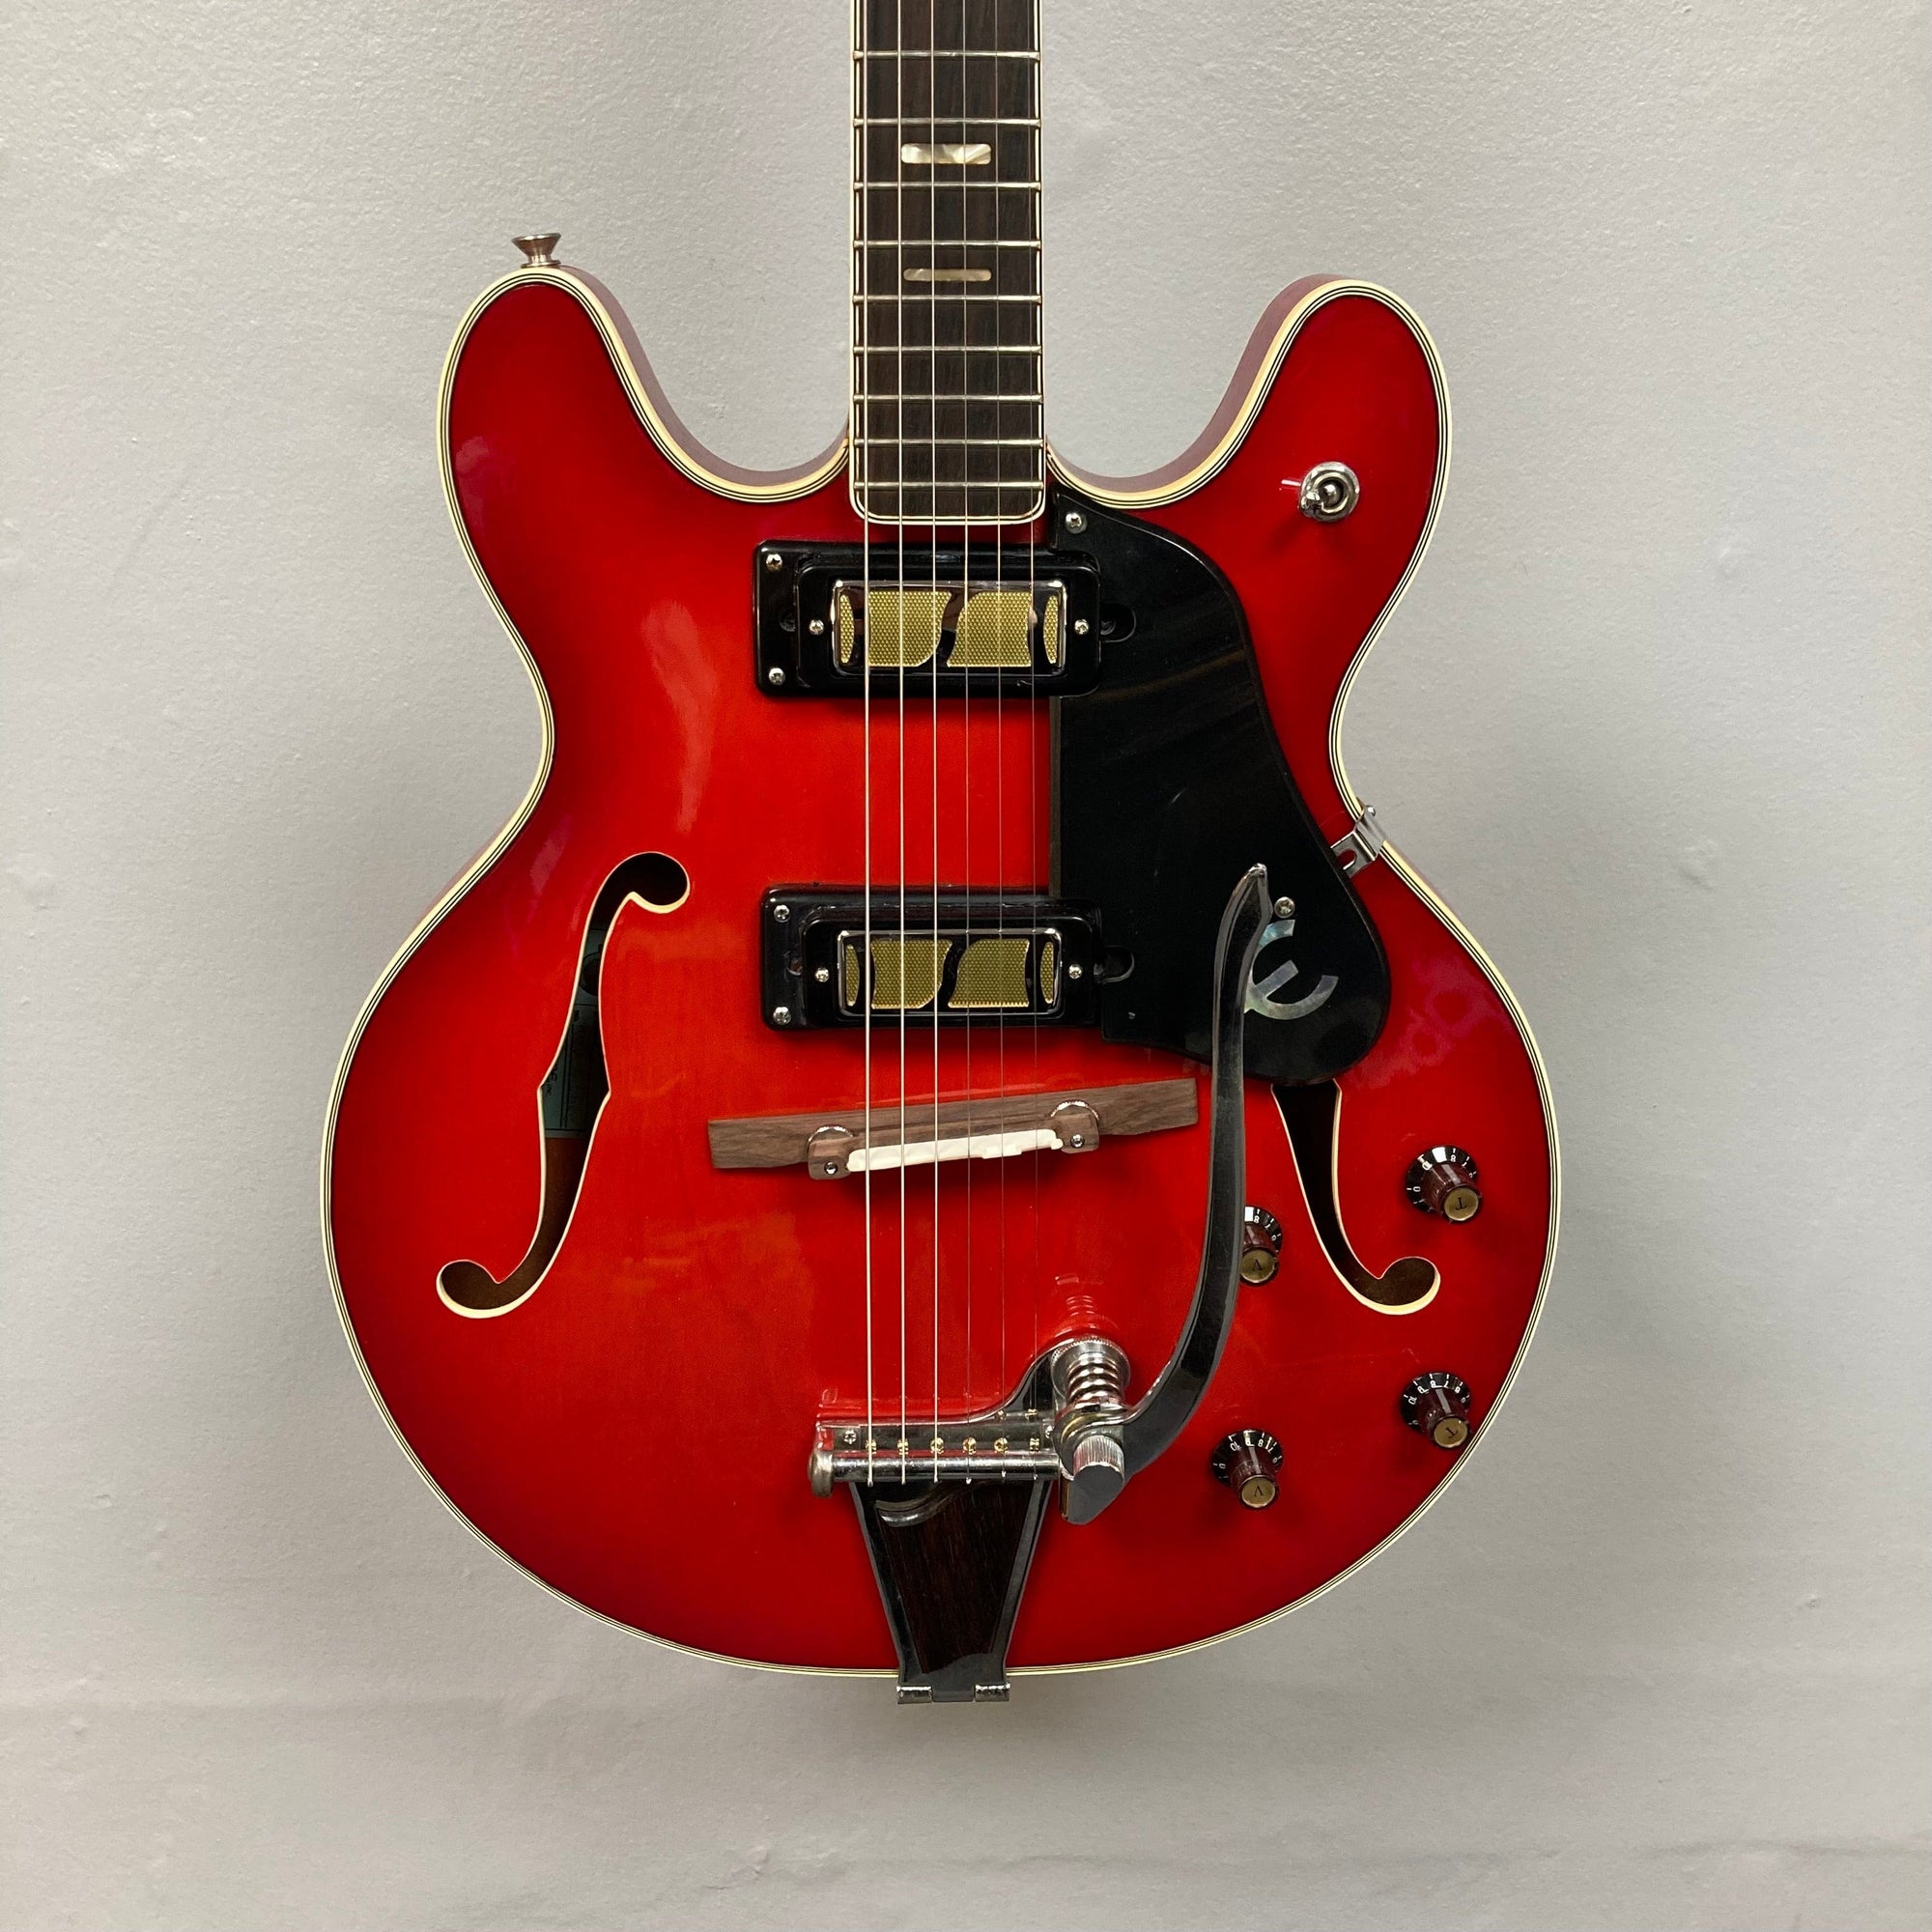 Epiphone EA-250 1972 - 1974 Made In Japan